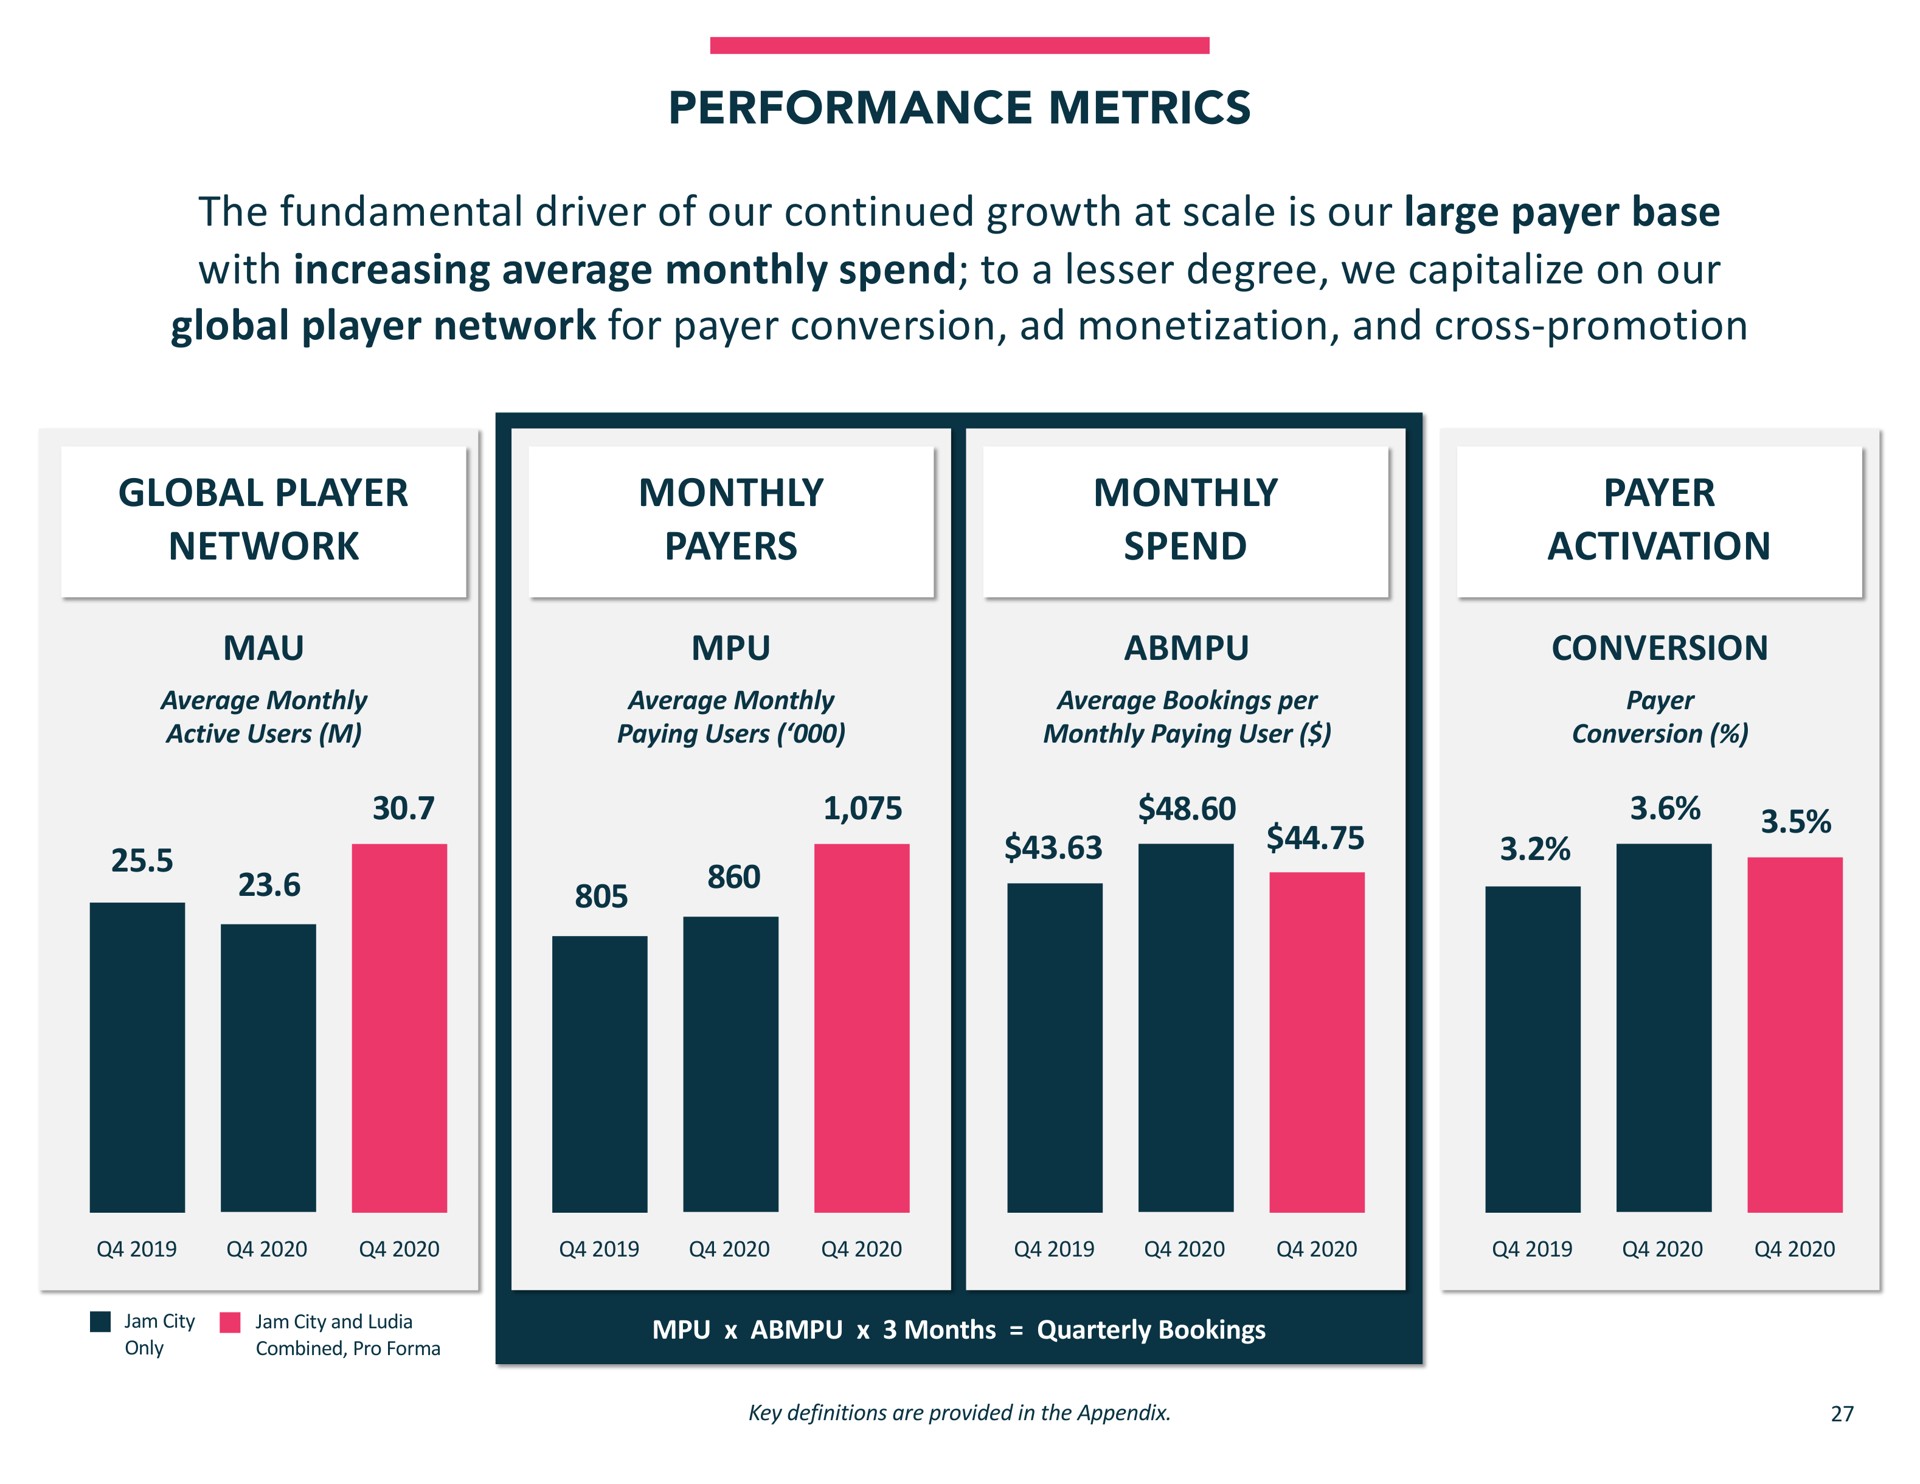 performance metrics the fundamental driver of our continued growth at scale is our large payer base with increasing average monthly spend to a lesser degree we capitalize on our global player network for payer conversion monetization and cross promotion global player network mau average monthly active users monthly payers average monthly paying users monthly spend average bookings per monthly paying user payer activation conversion payer conversion months quarterly bookings key definitions are provided in the appendix i jam city jam city | Jam City